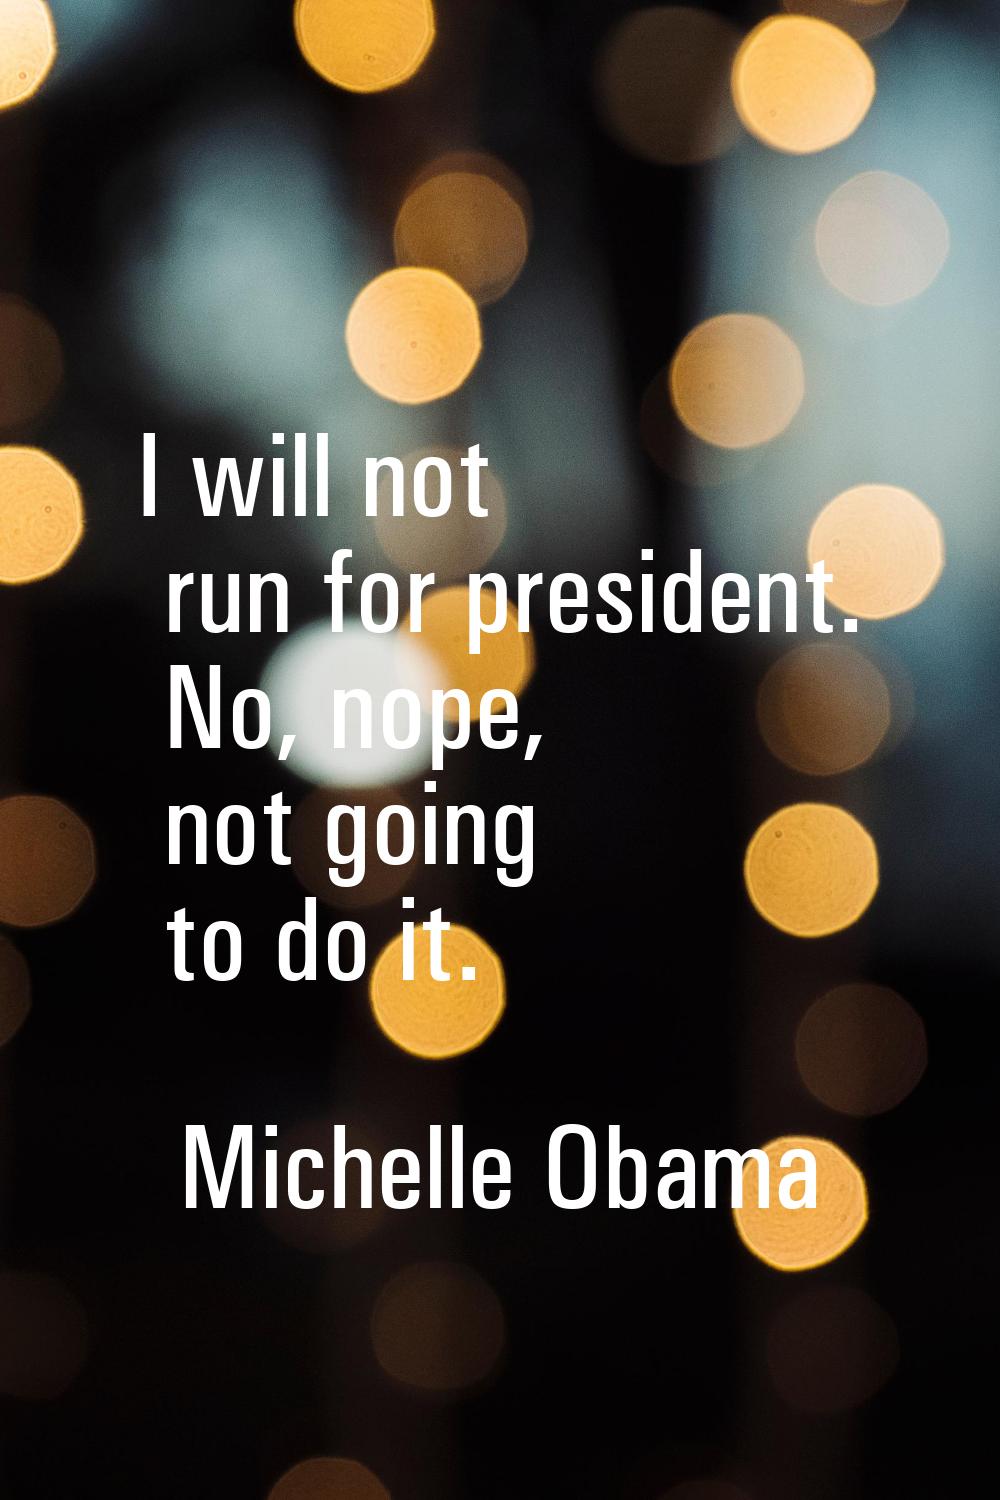 I will not run for president. No, nope, not going to do it.